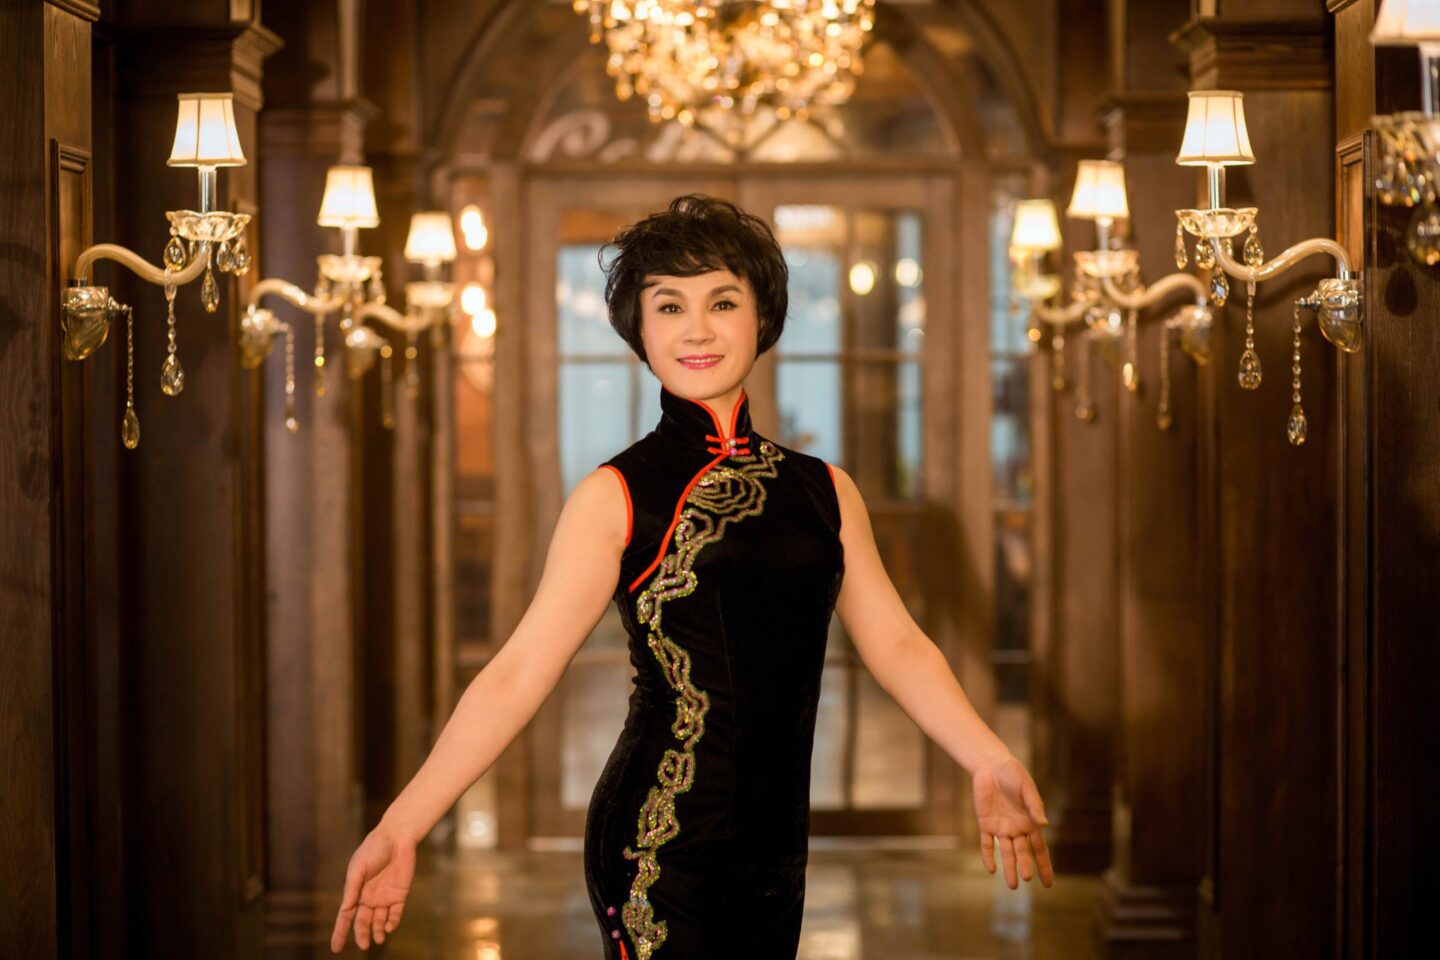 Melody Institute dances at Spotlight July 13, 2023. A woman of asian decent wearing a black qipao/cheongsam with gold and red embroidery stands with open arms in front of a hallway lit with soft golden light.